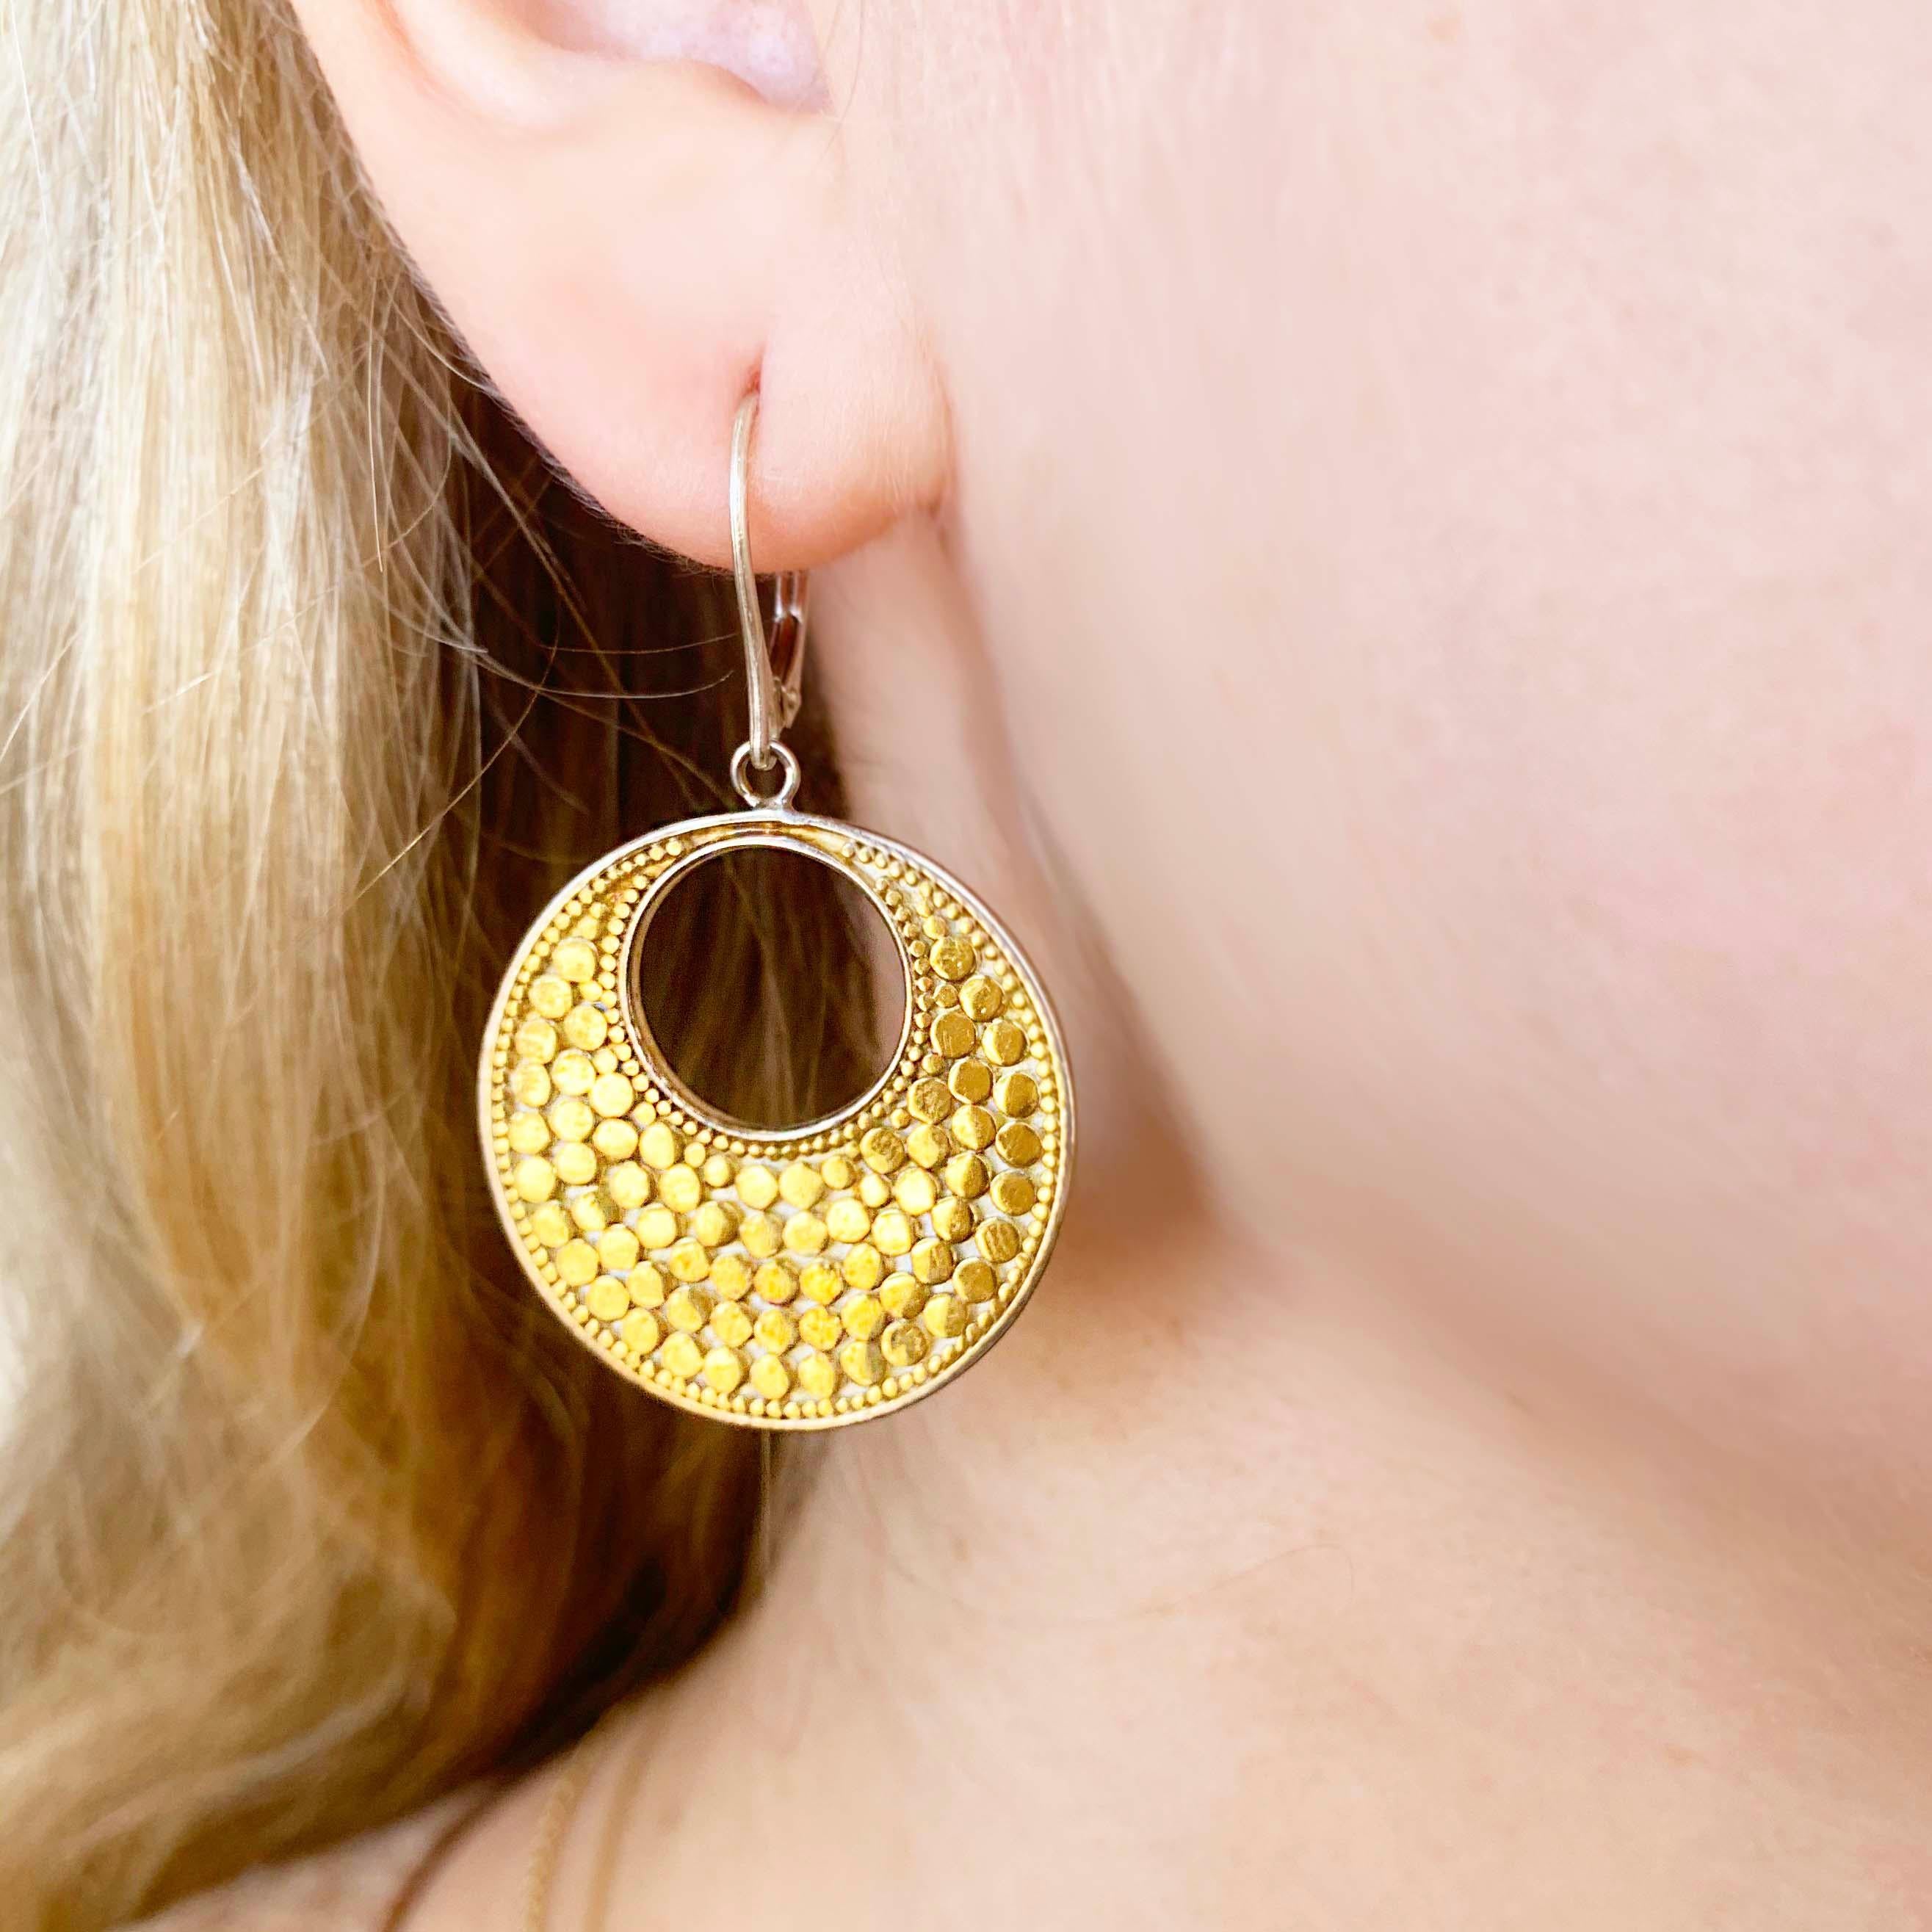 These precious earrings are a MUST BUY!  These earrings were handmade with 18 karat yellow gold that have been bonded with a sterling silver disk. The 18 kt yellow gold round earrings have a sterling silver back and sterling silver kidney wires.